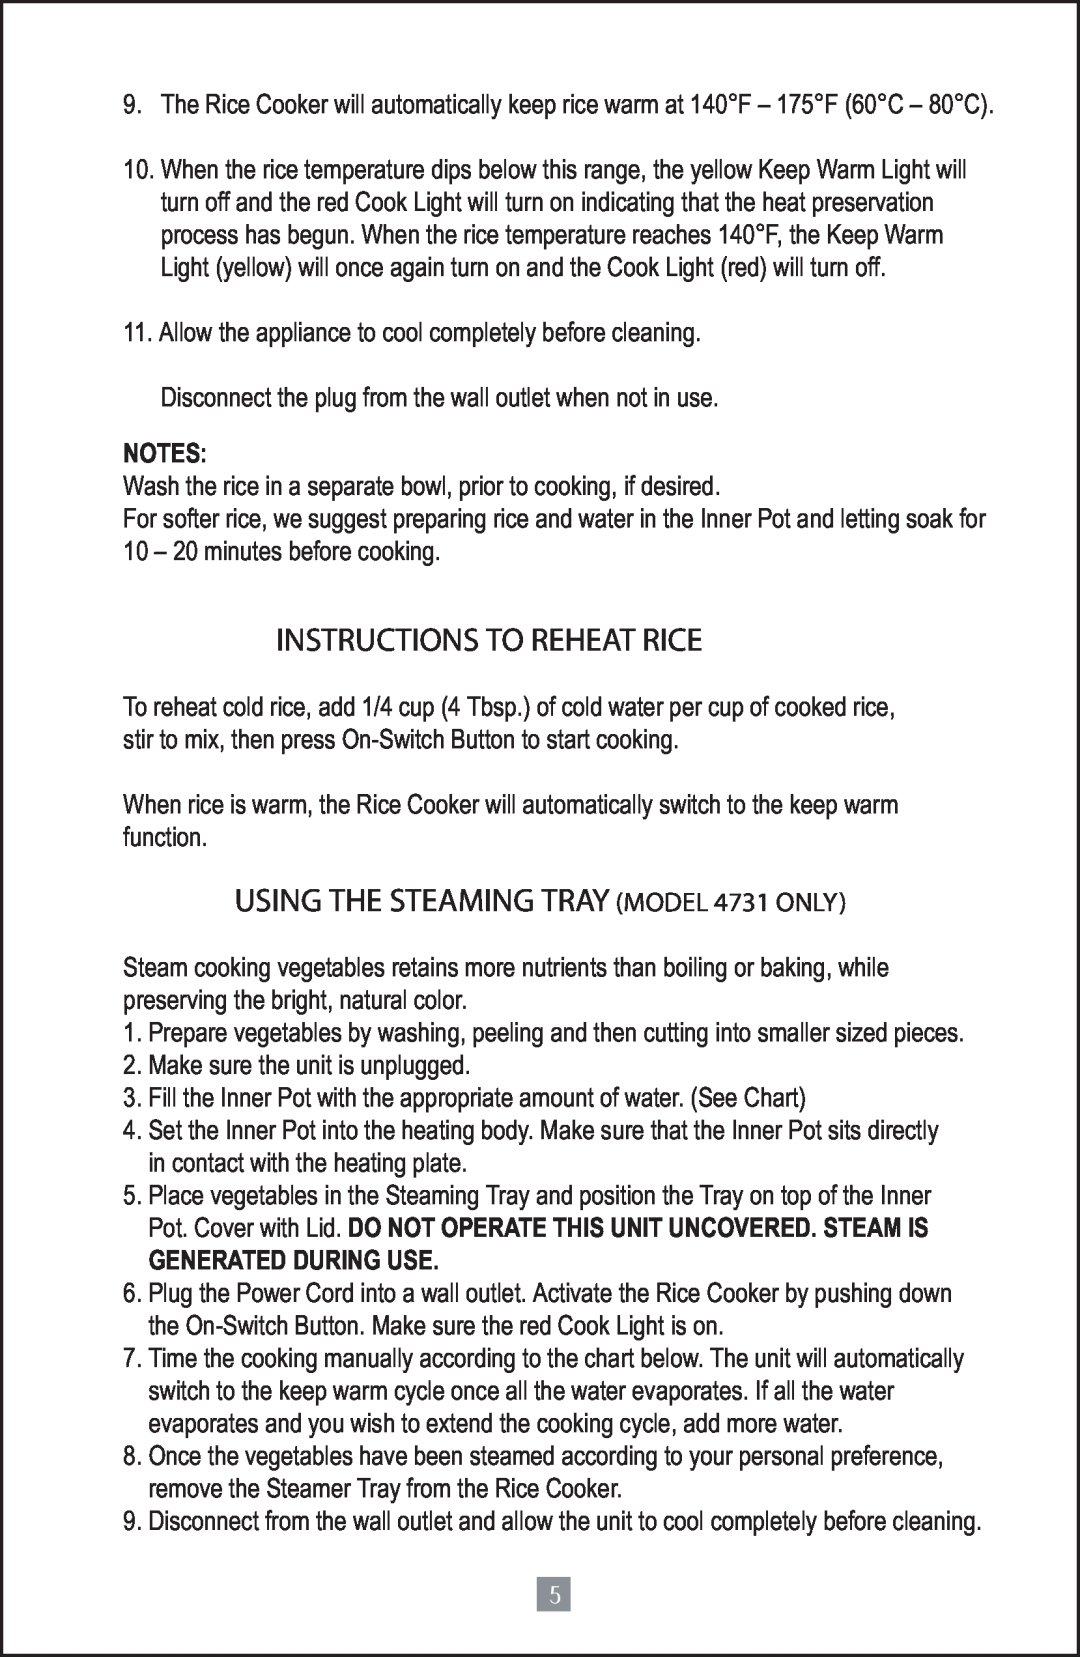 Oster 4728 instruction manual Generated During Use, Instructions To Reheat Rice, USING THE STEAMING TRAY MODEL 4731 ONLY 